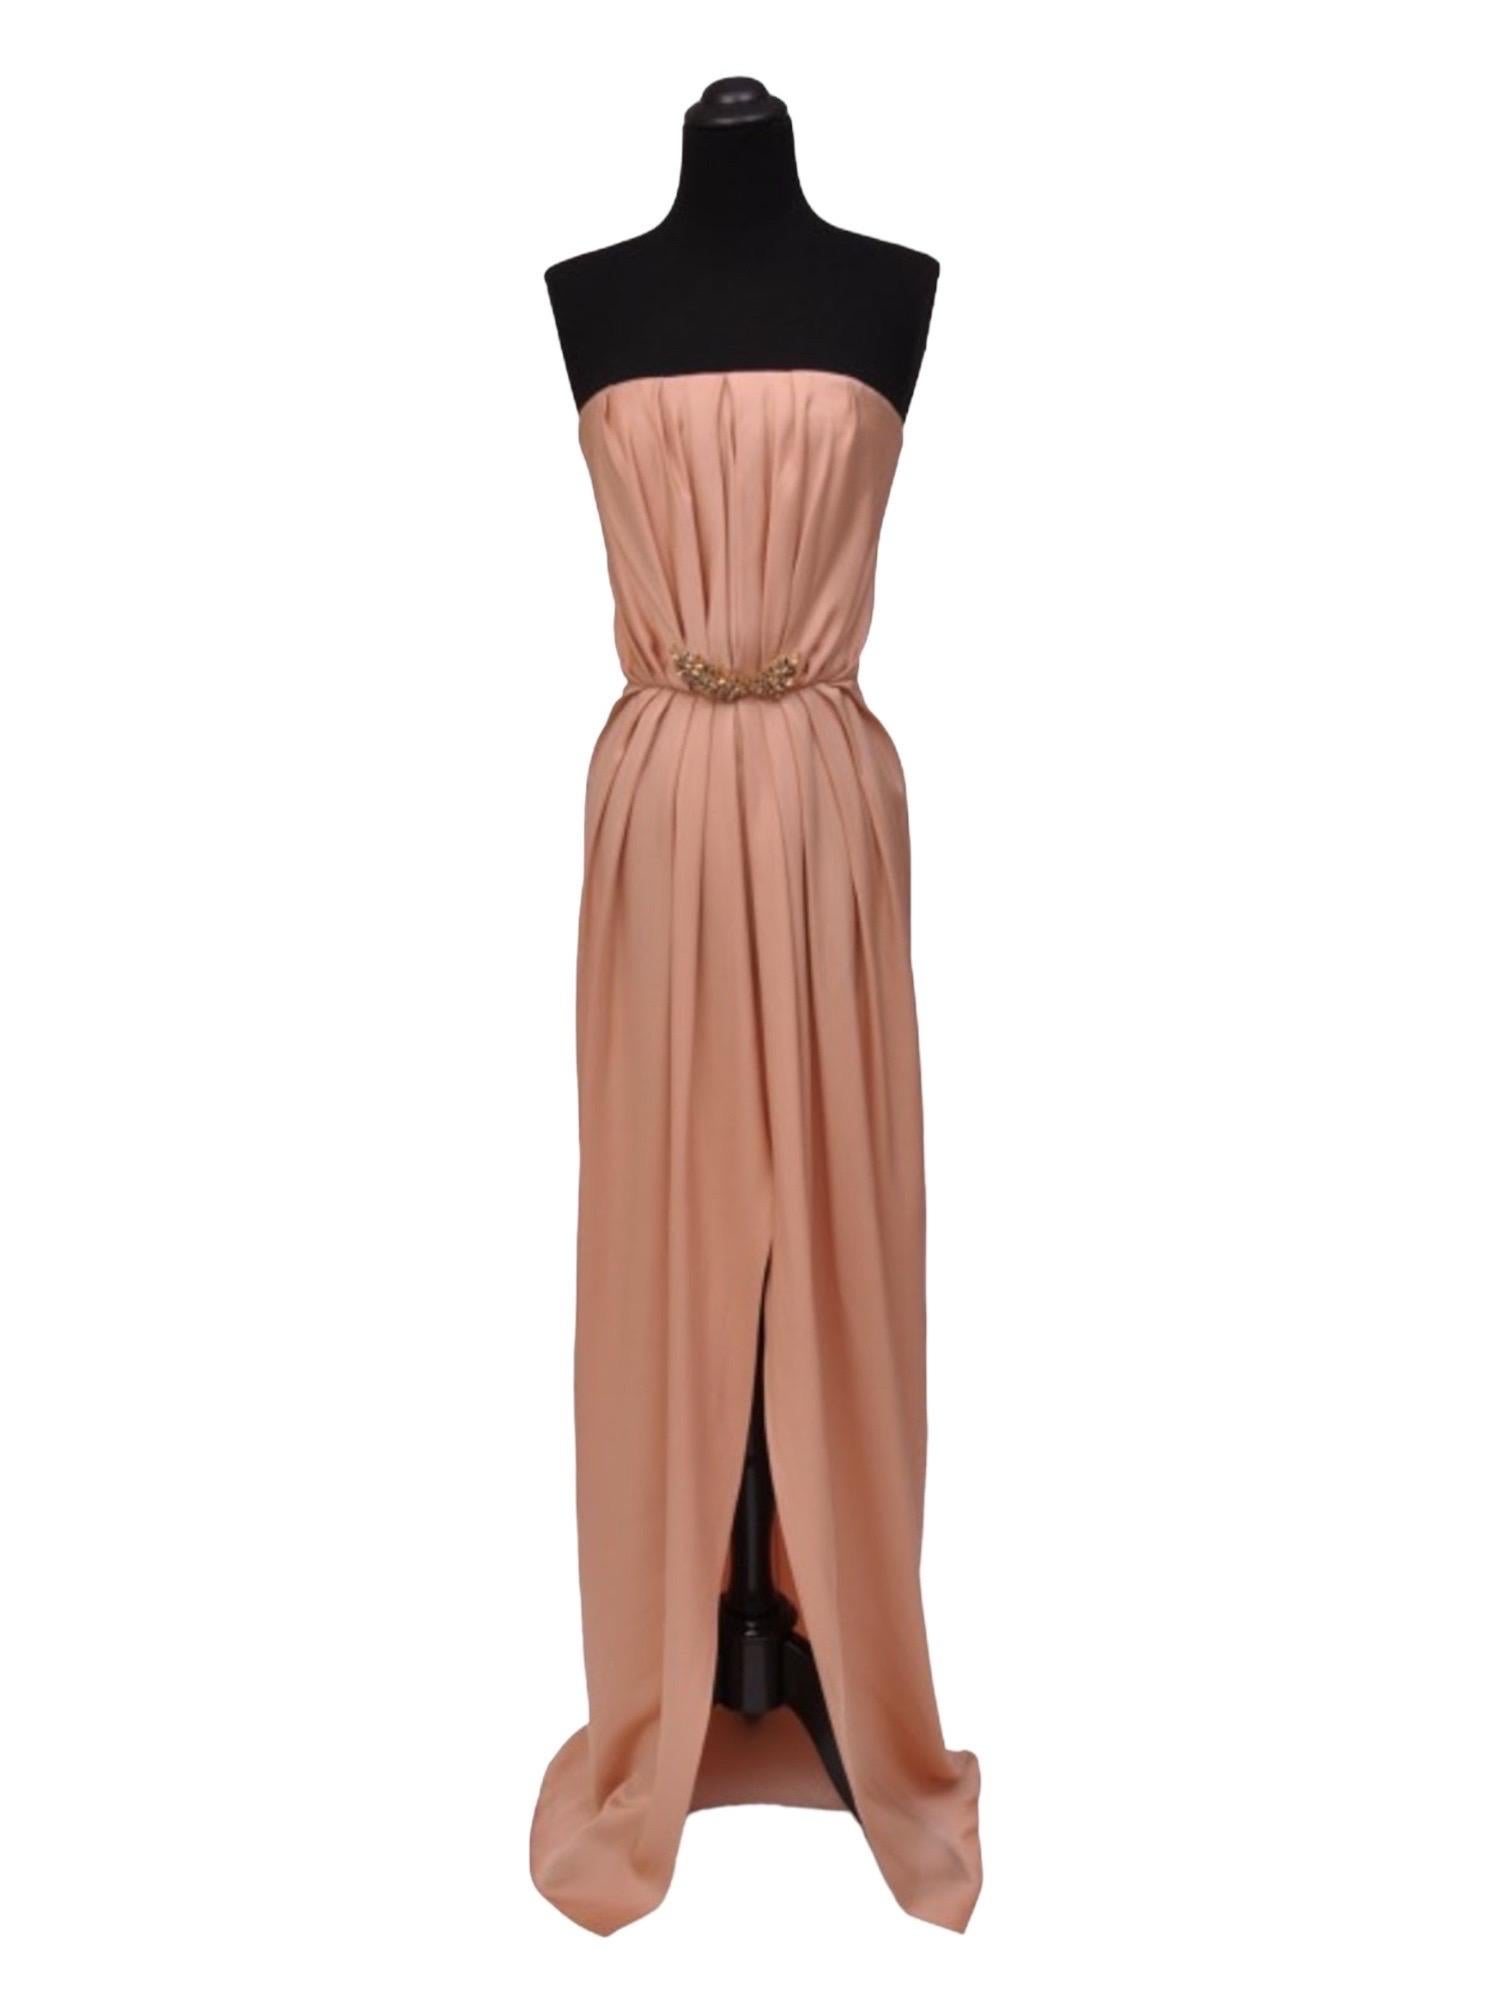 Saint Laurent
Edition Soir
Embellished Strapless Silk Dress
Carla Bruni-Sarkozy looked stunning in this column dress. 
Kylie Minogue wore the same gown to the BRIT Awards.
Now it's your chance to own this delicate and incredibly elegant